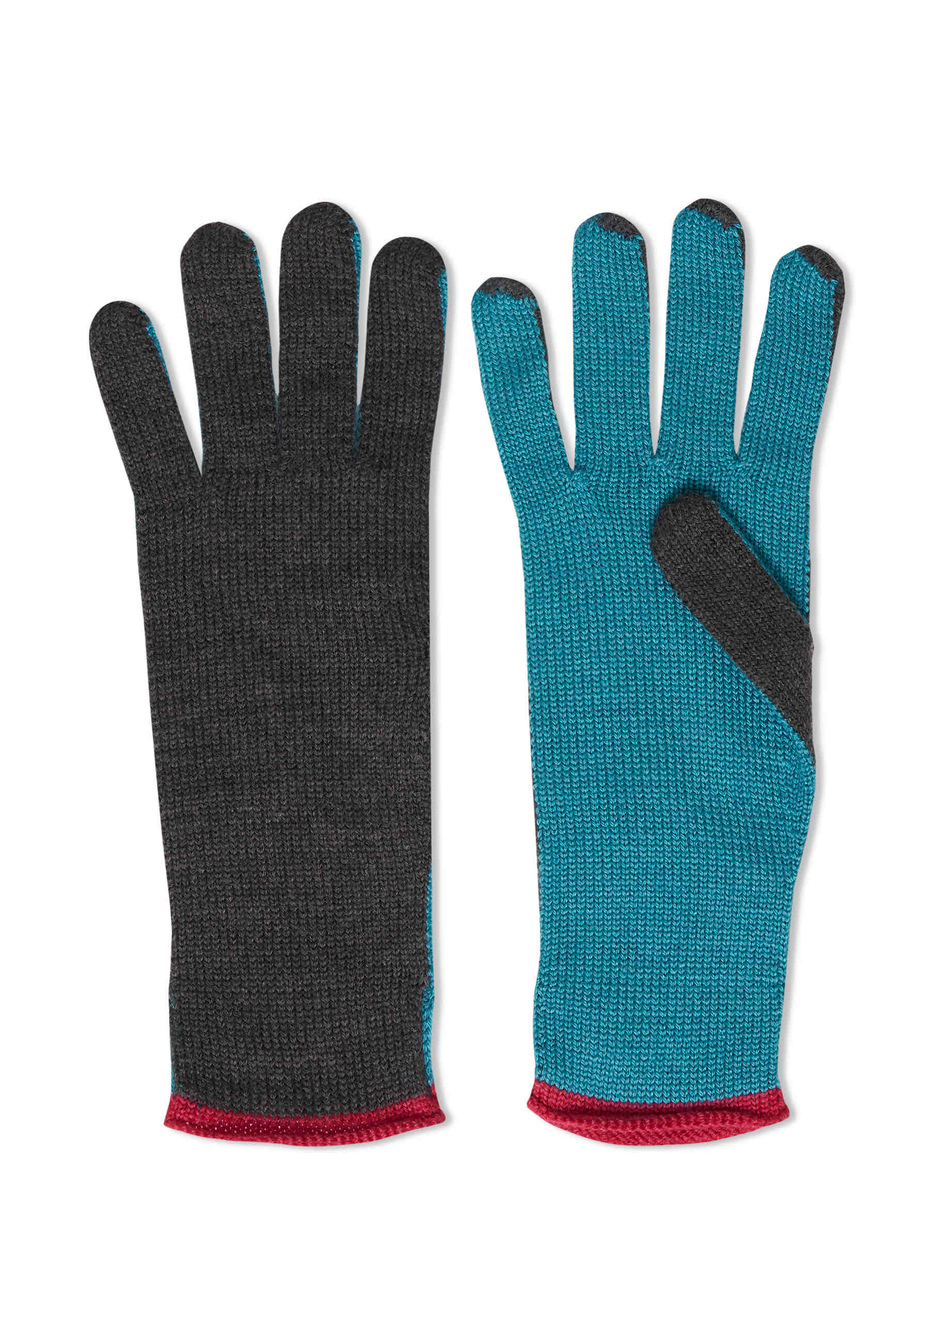 Women's plain charcoal grey wool, silk and cashmere gloves with contrasting details - Gallo 1927 - Official Online Shop